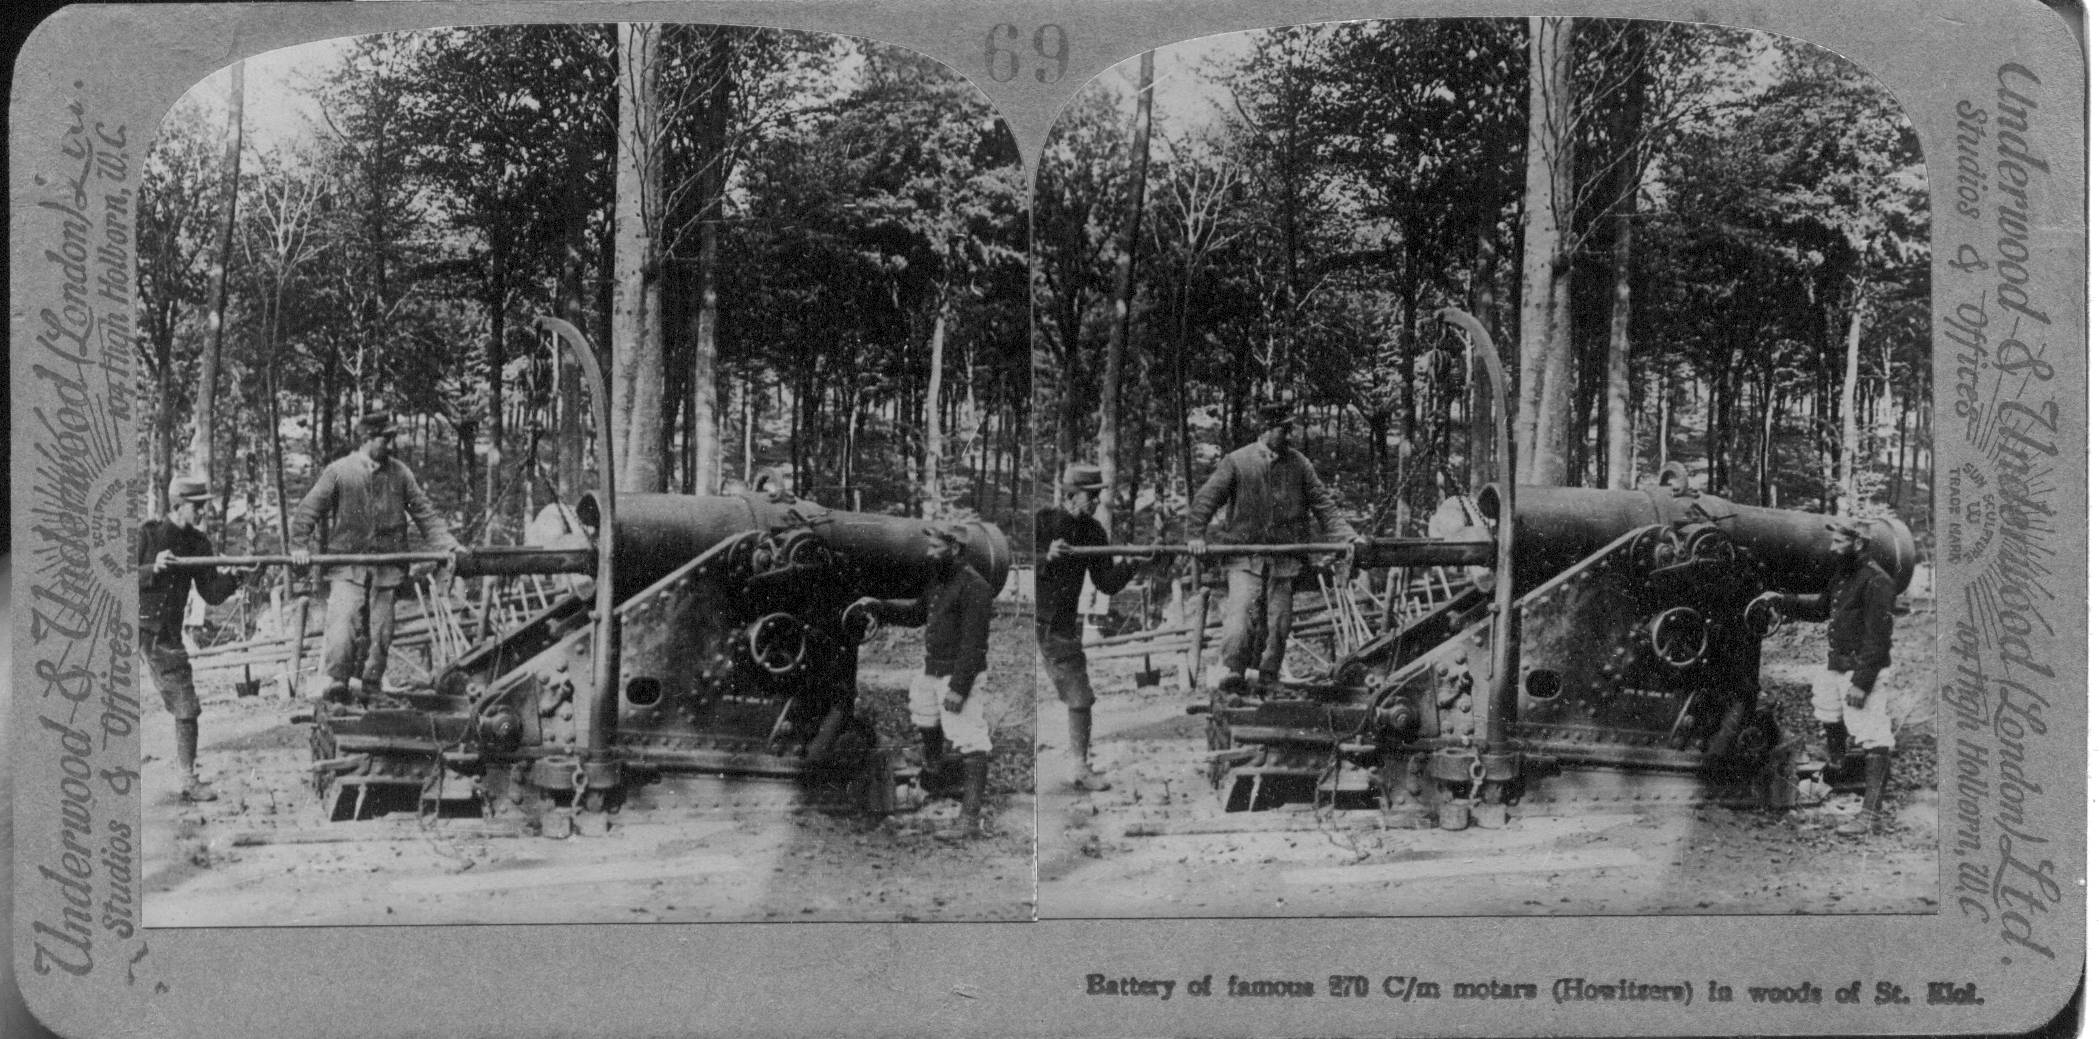 Battery of famous 270 C/m motars (sic) (Howitzers) in woods of St. Eloi